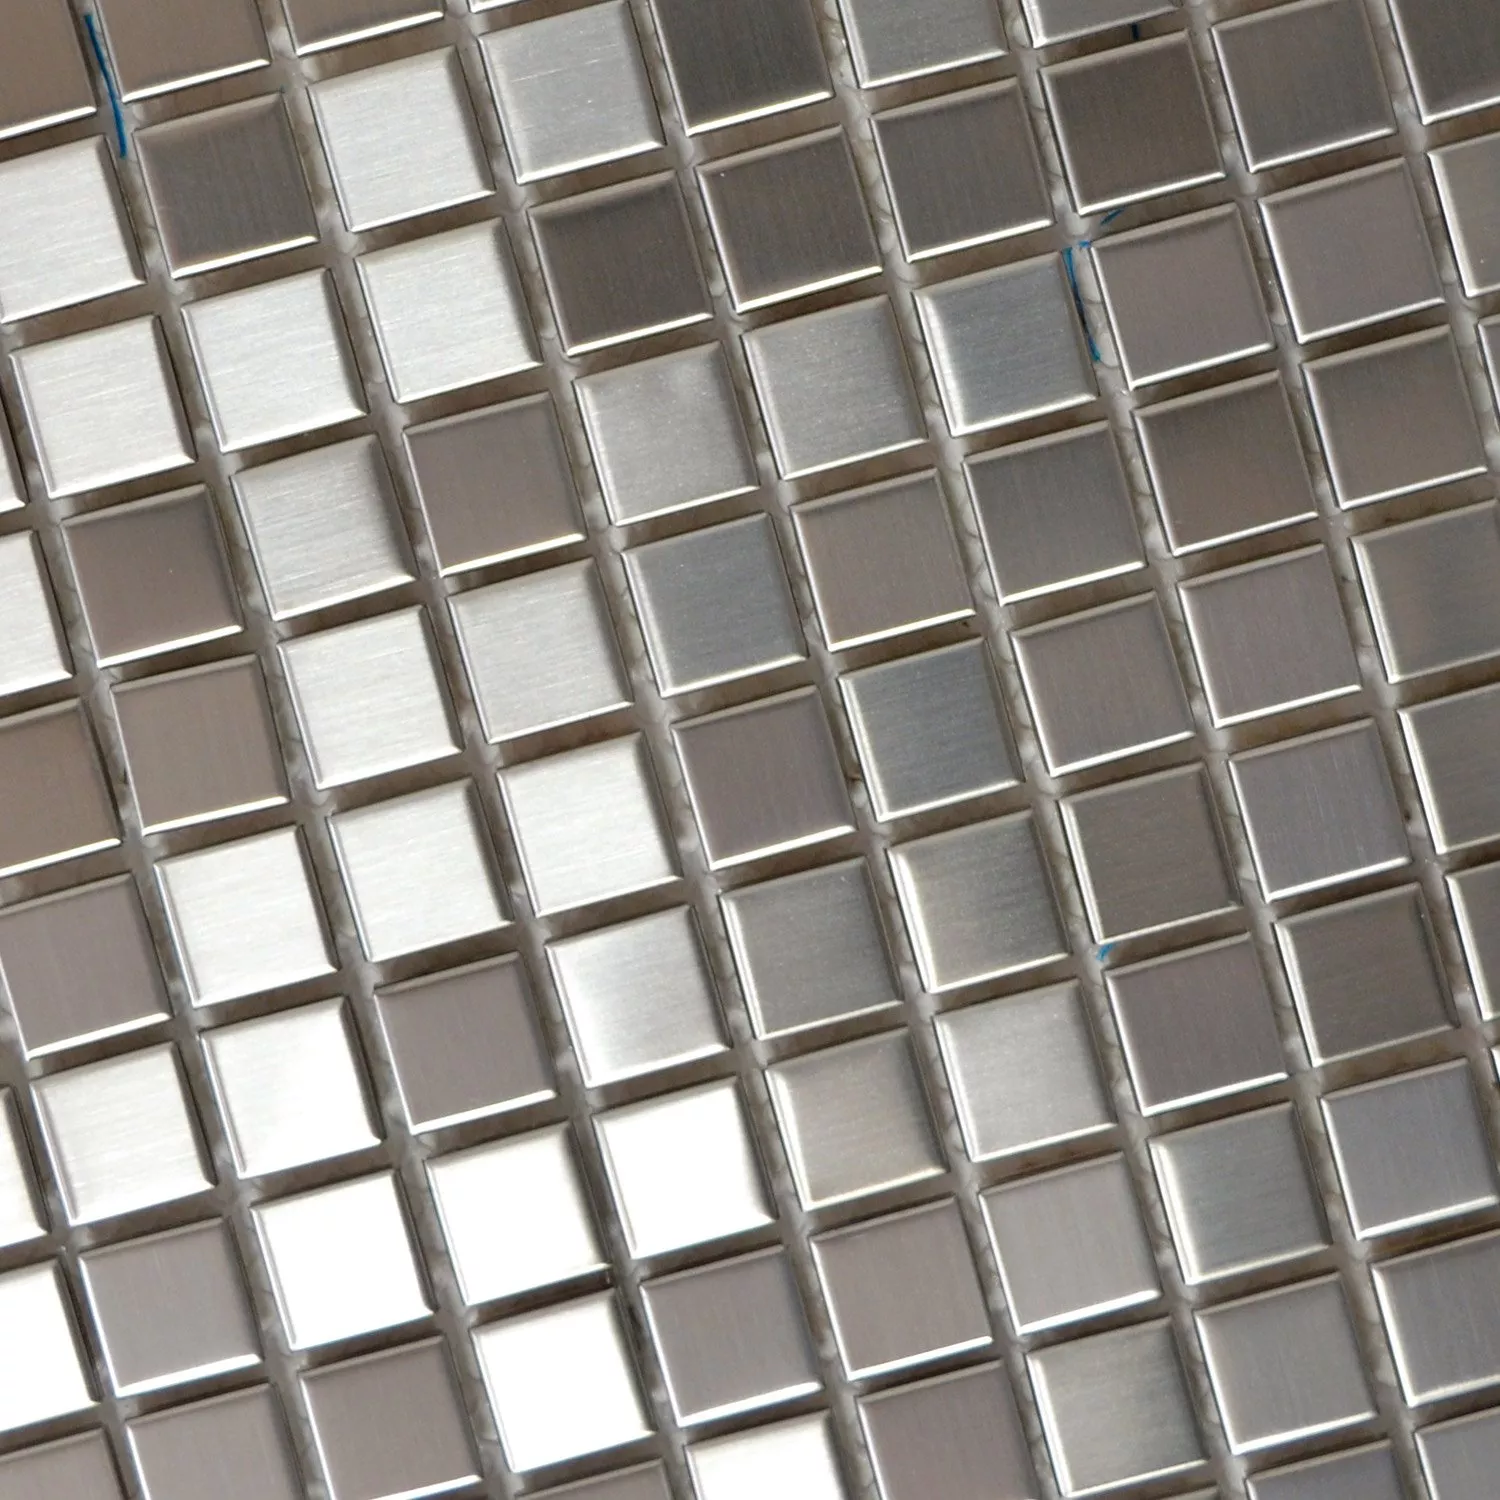 Sample Stainless Steel Mosaic Tiles Brushed Square 15